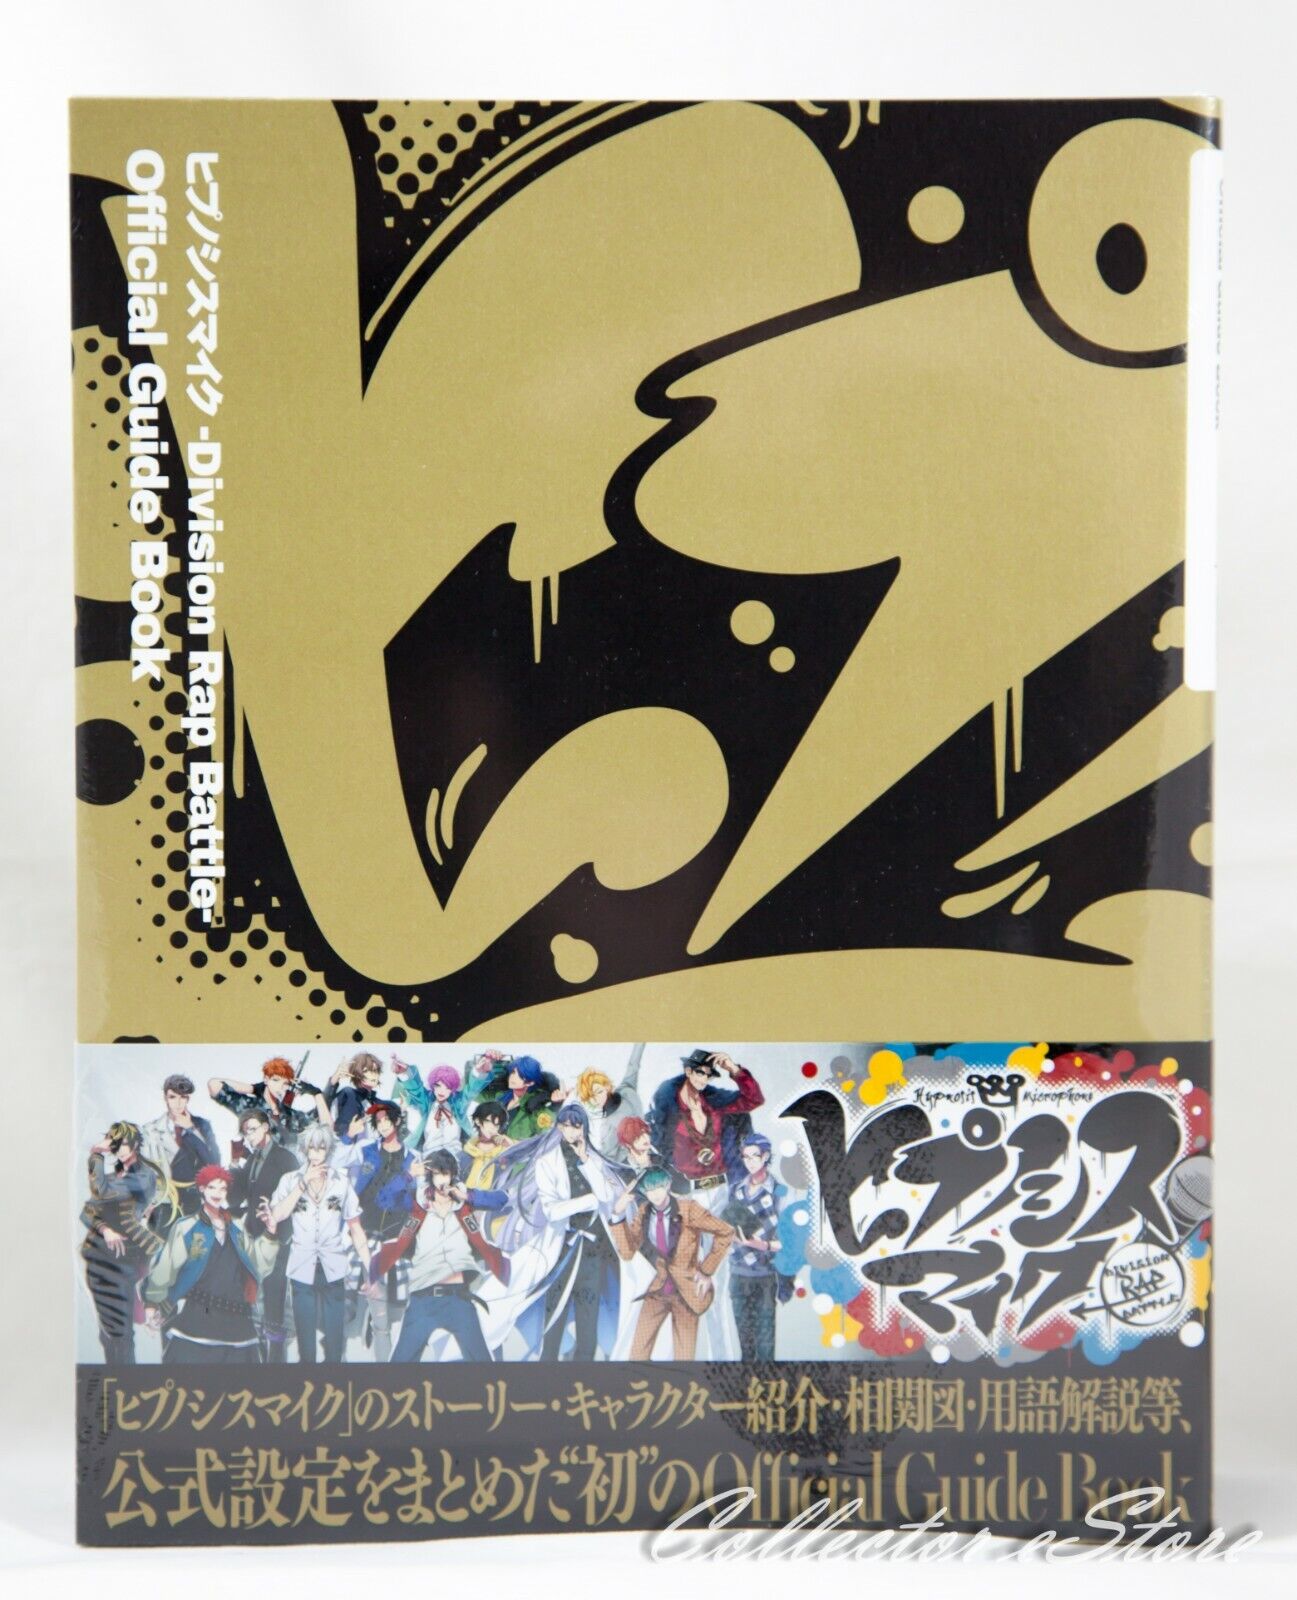 Hypnosis Mic: Division Rap Battle Official Guide Book (AIR/DHL)